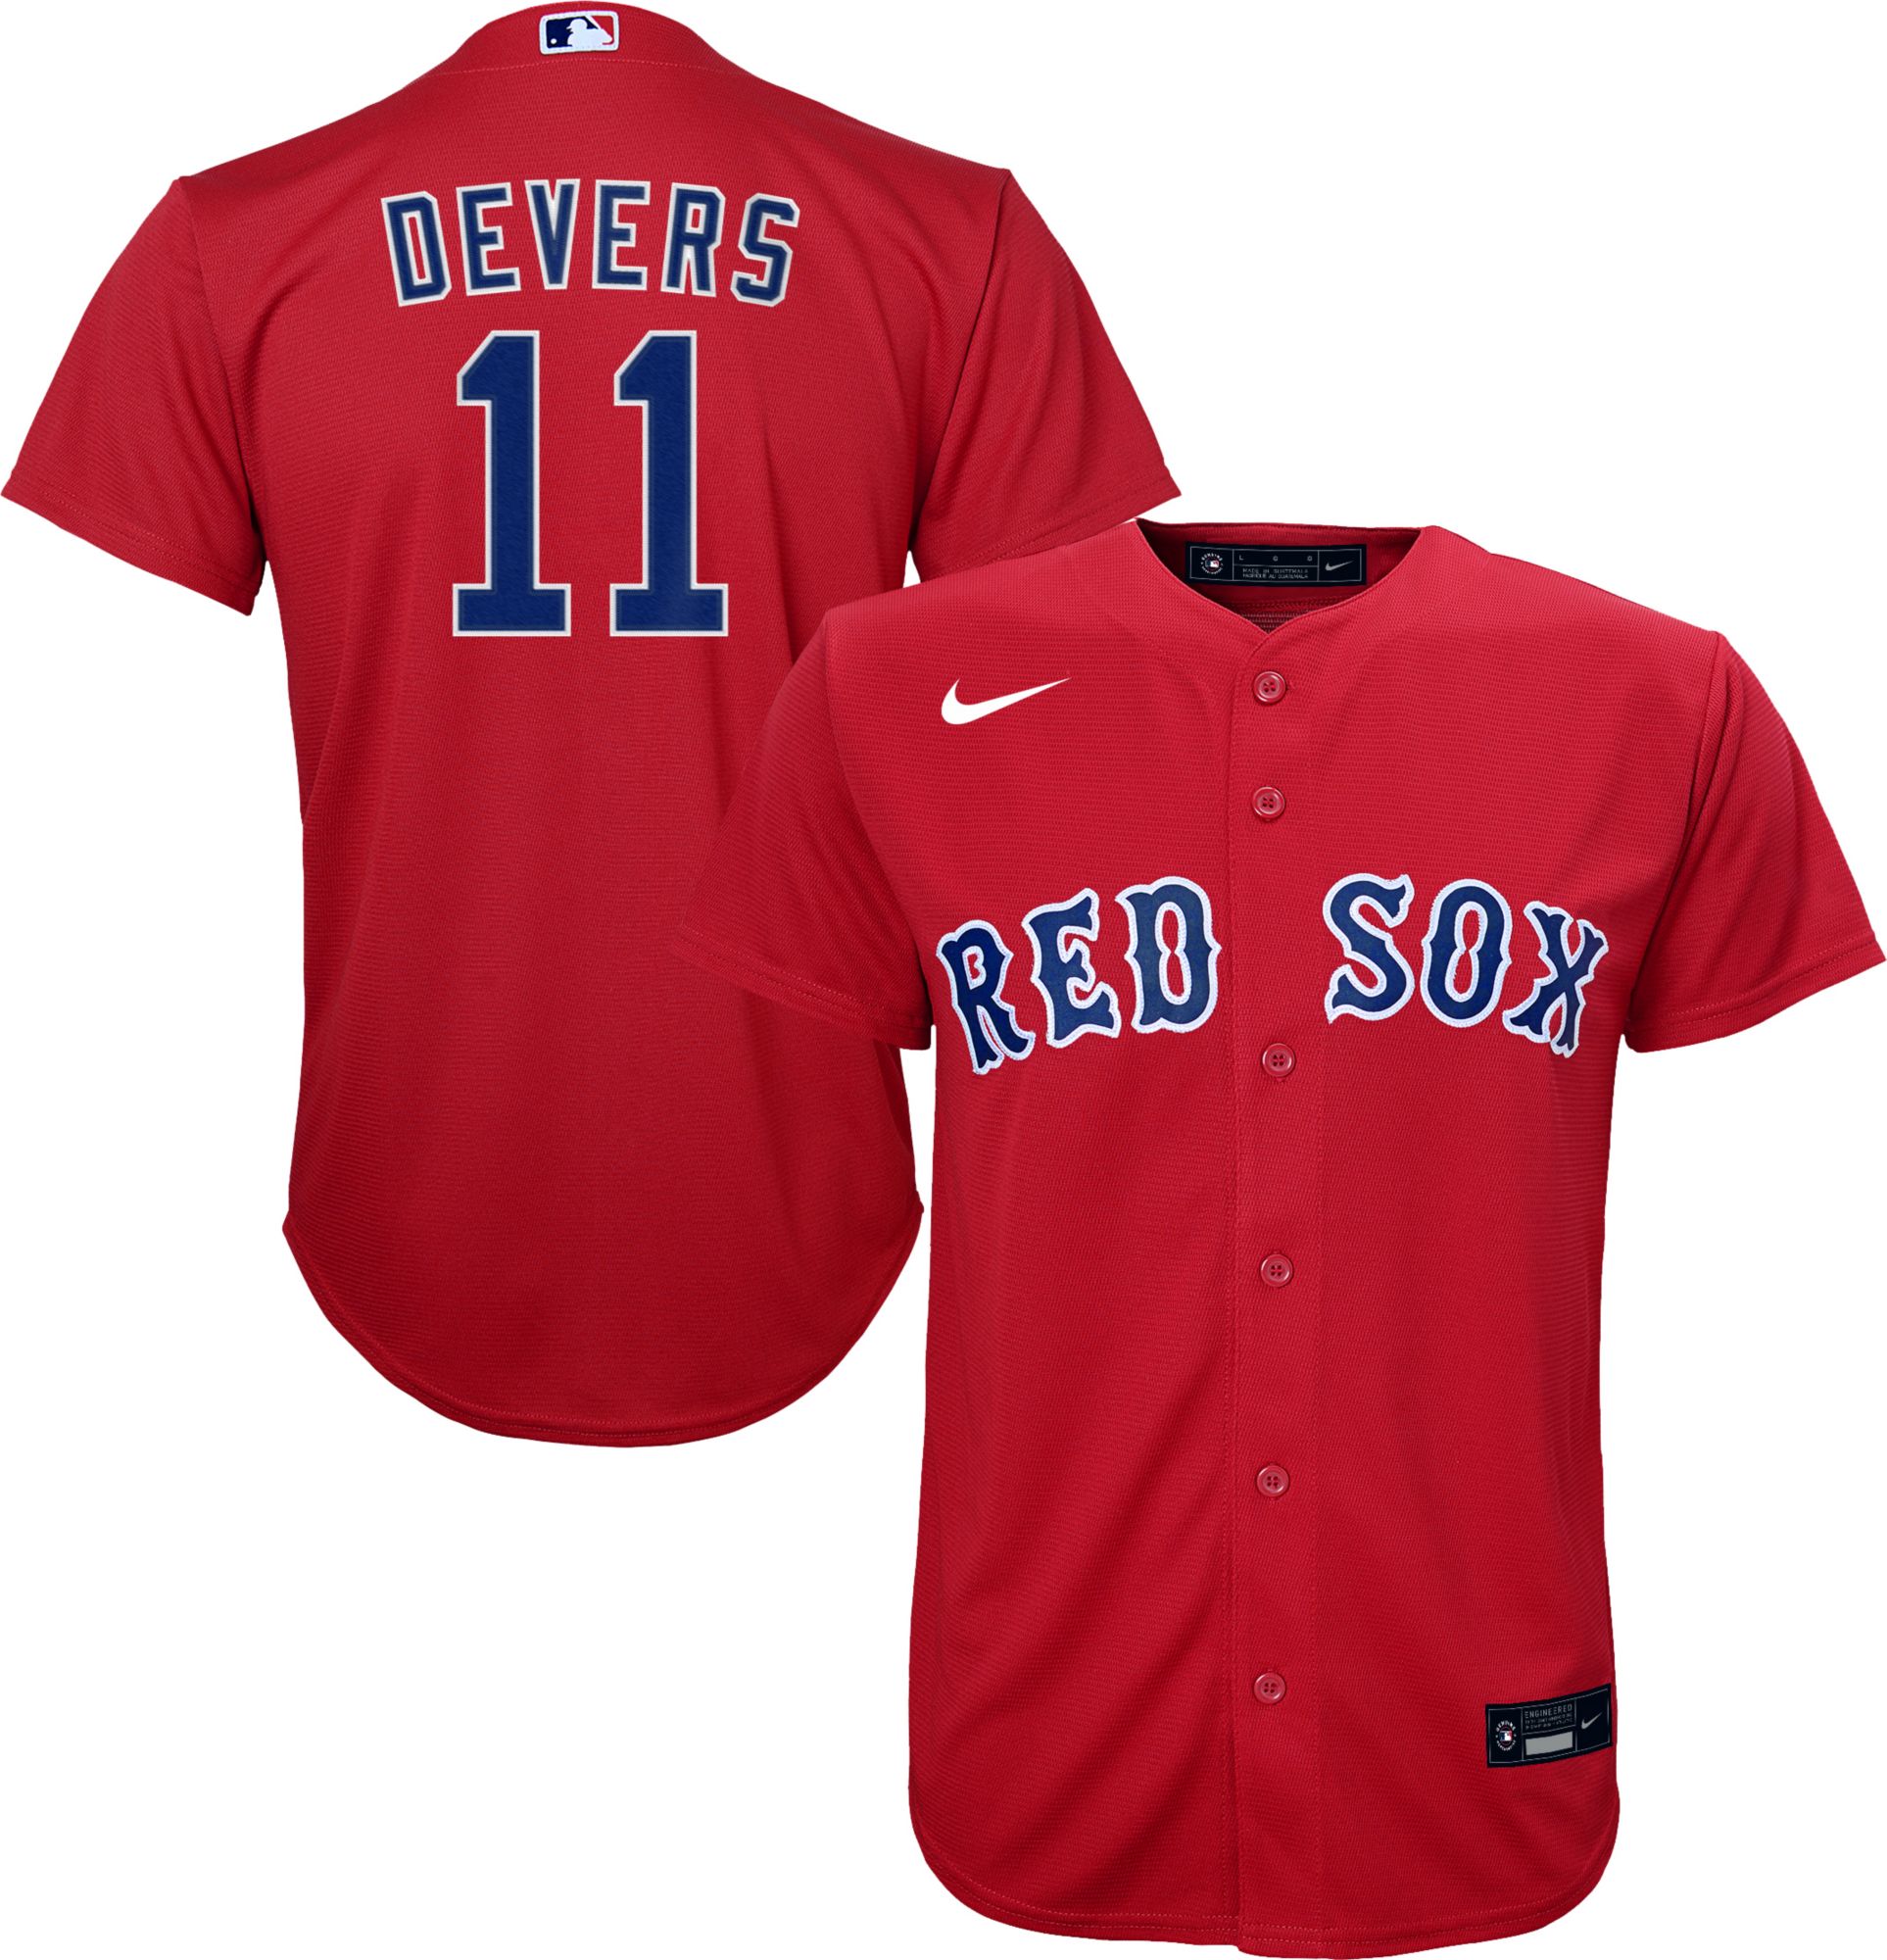 Nike / Youth Replica Boston Red Sox Rafael Devers #11 Cool Base Red Jersey